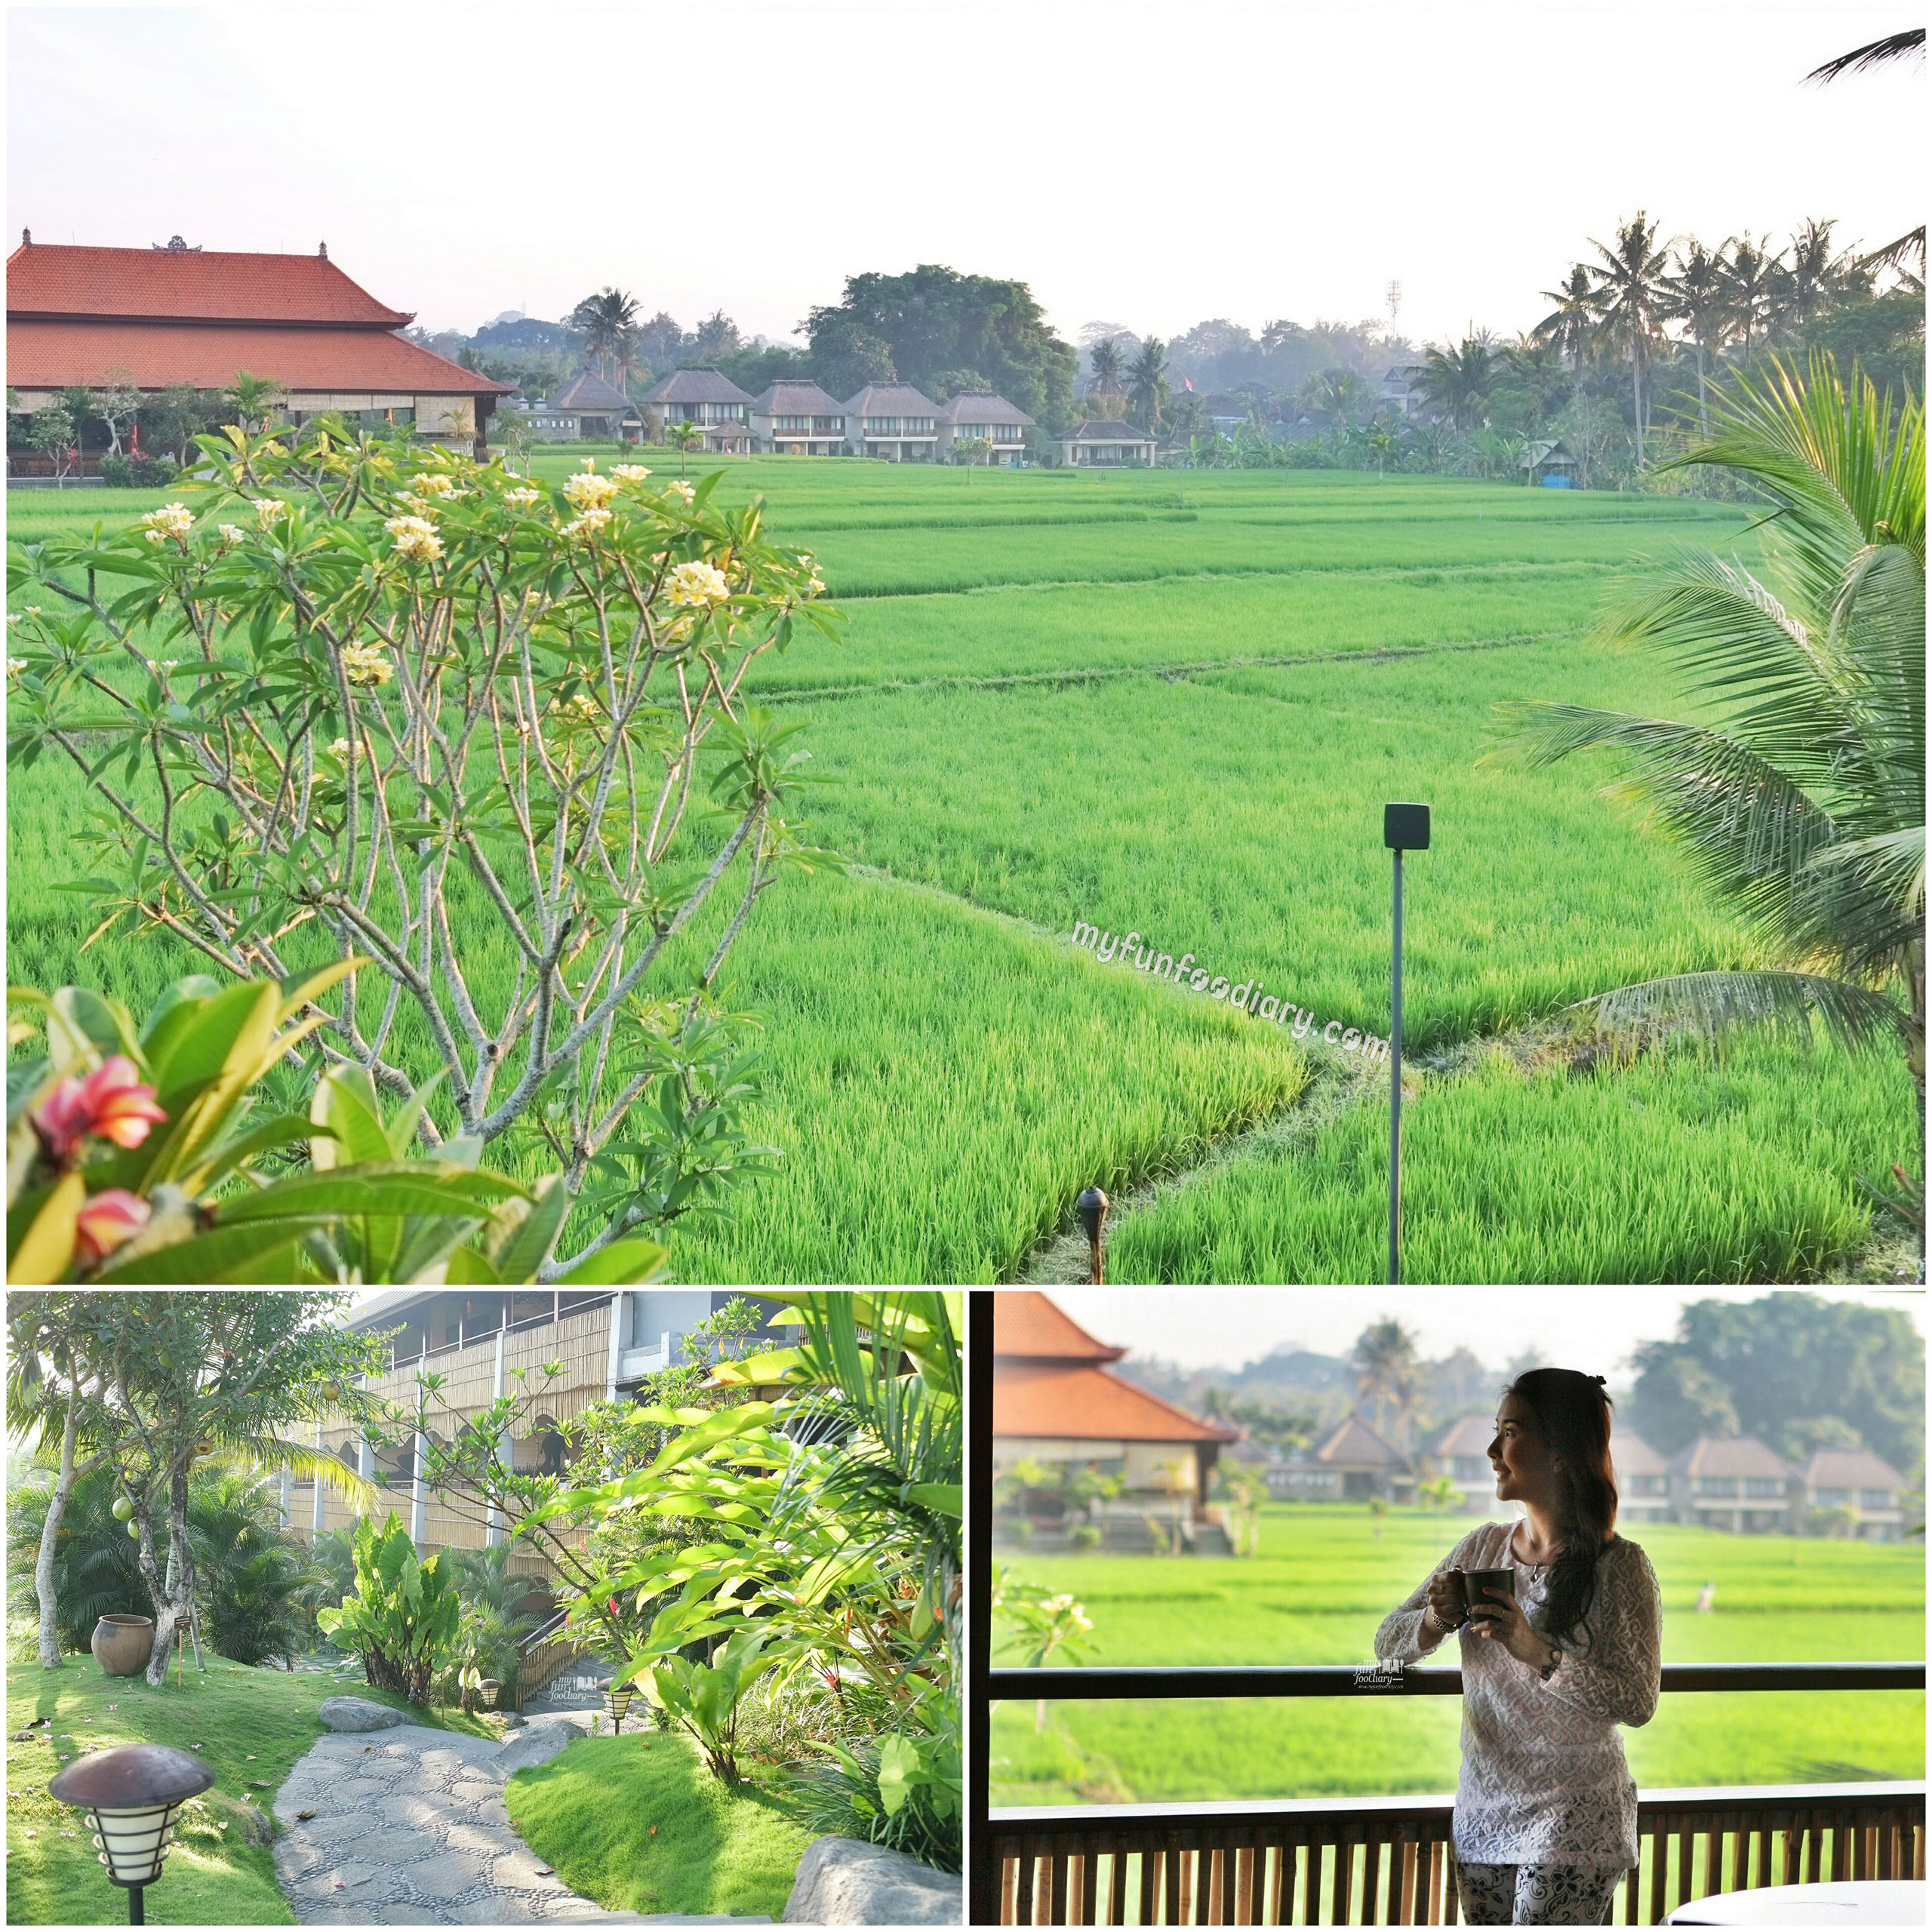 View From Our Room at Alaya Resort Ubud by Myfunfoodiary v2